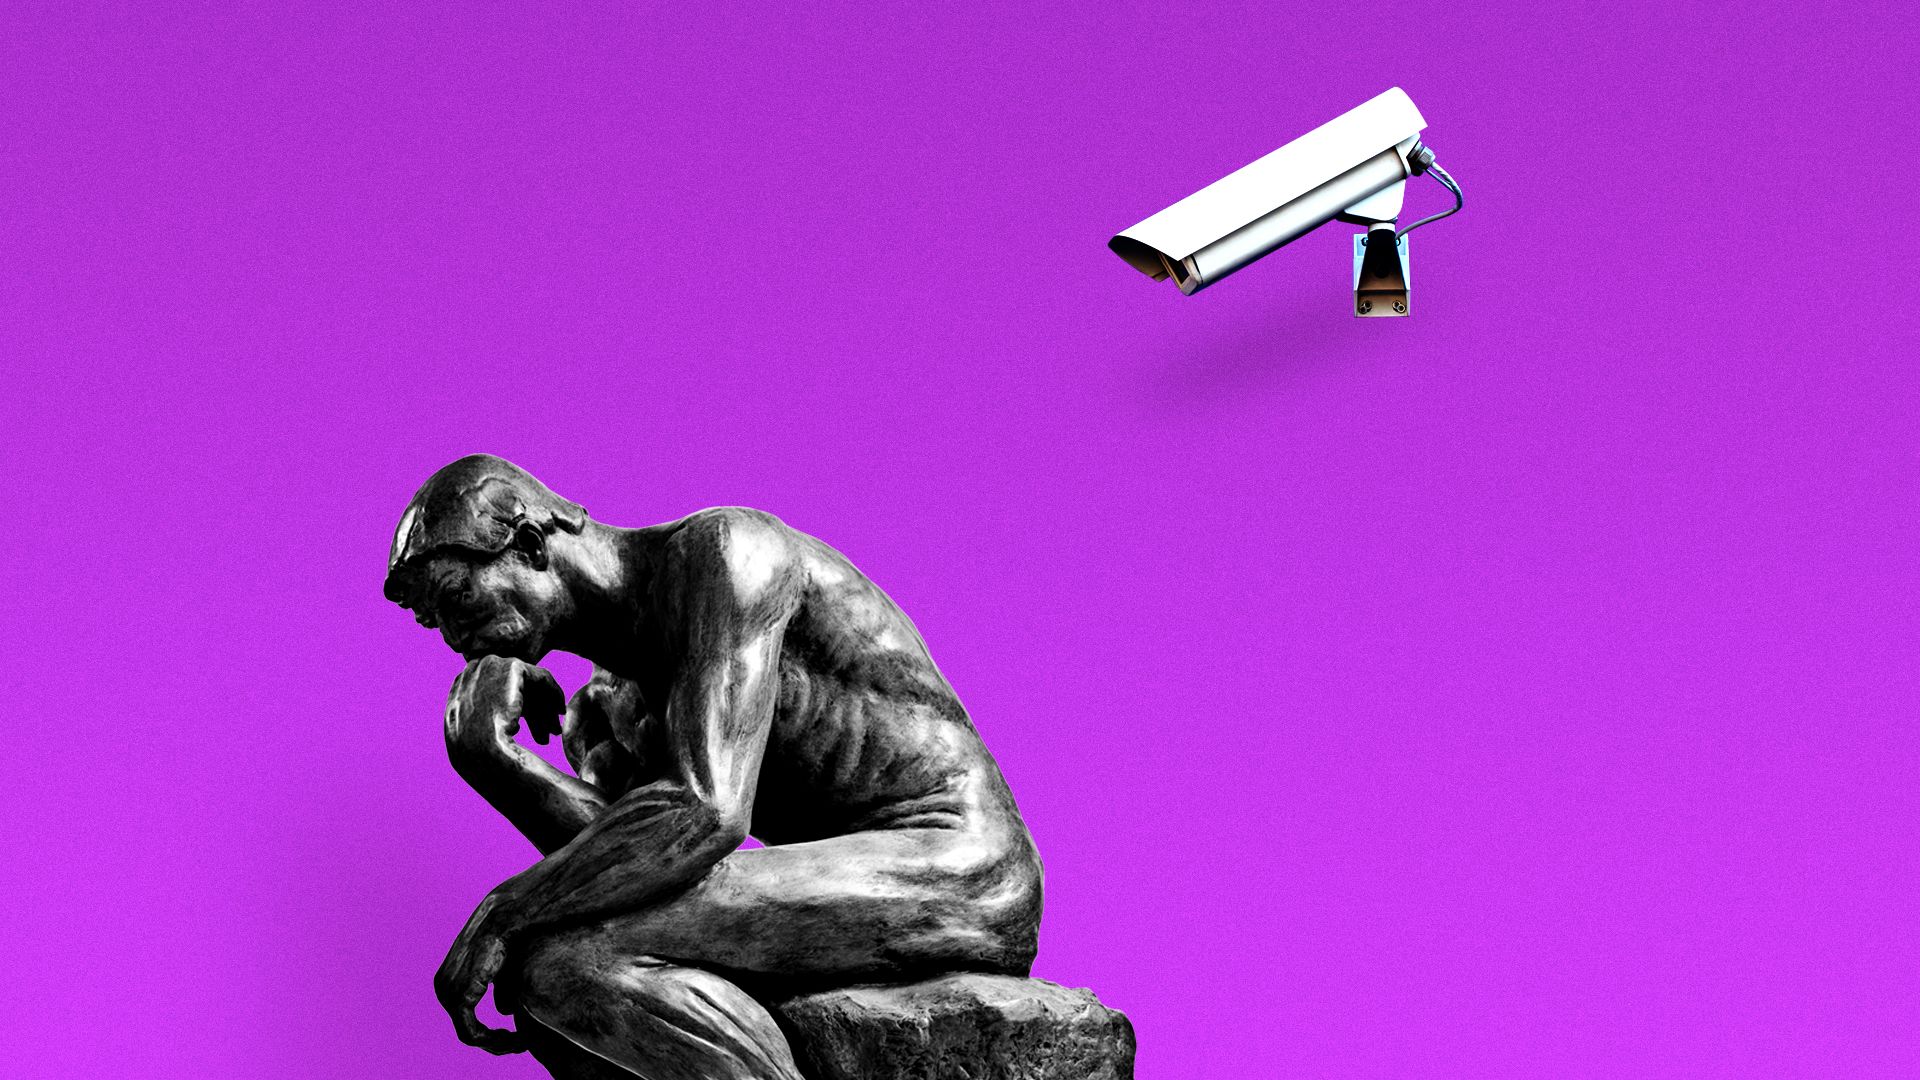 Rodin's 'The Thinker' being watched by CCTV